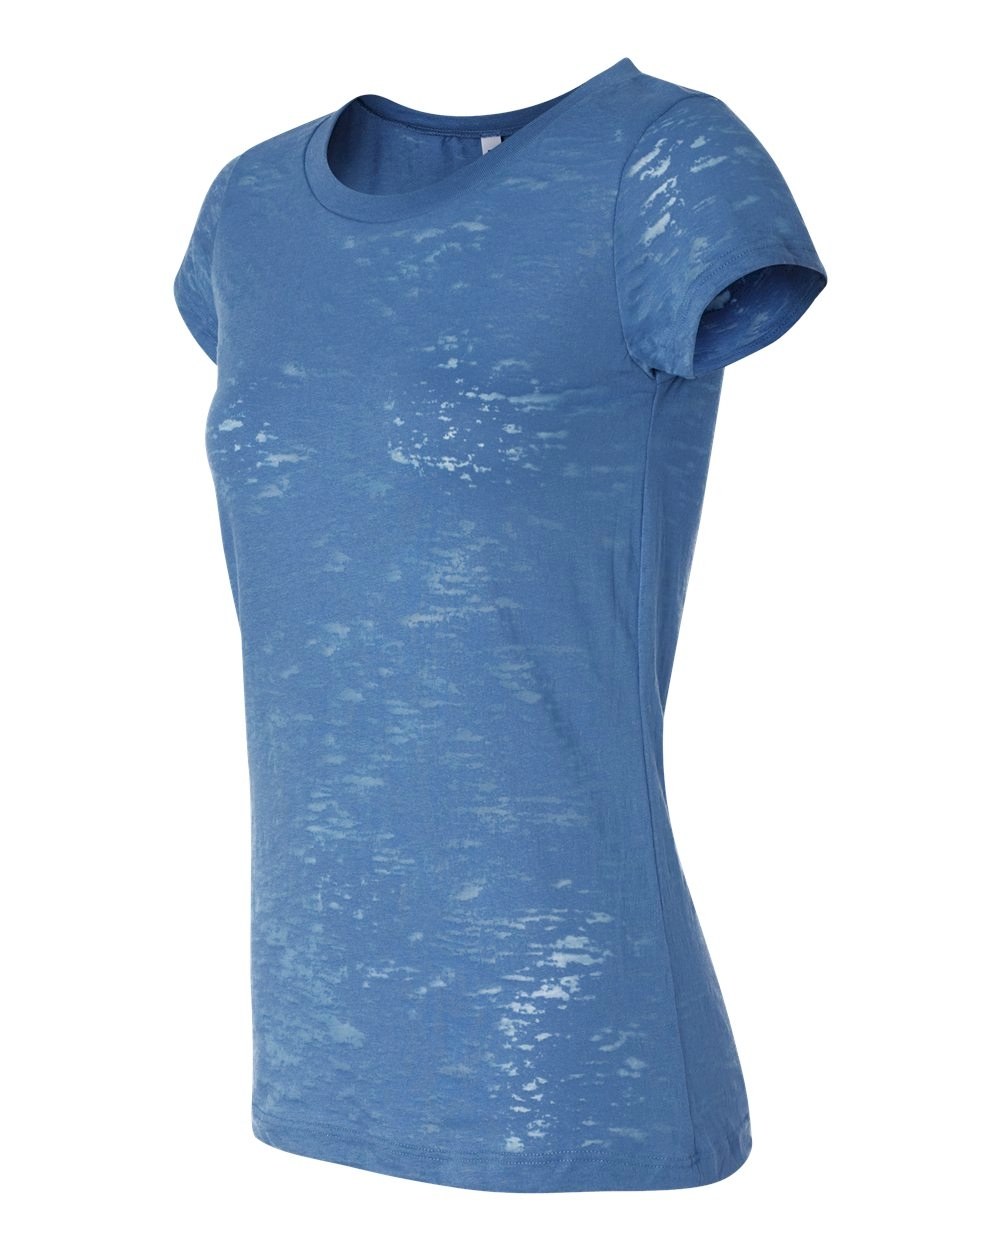 Bella + Canvas Ladies' Burnout T-Shirt Embroidery Blanks - STEEL BLUE